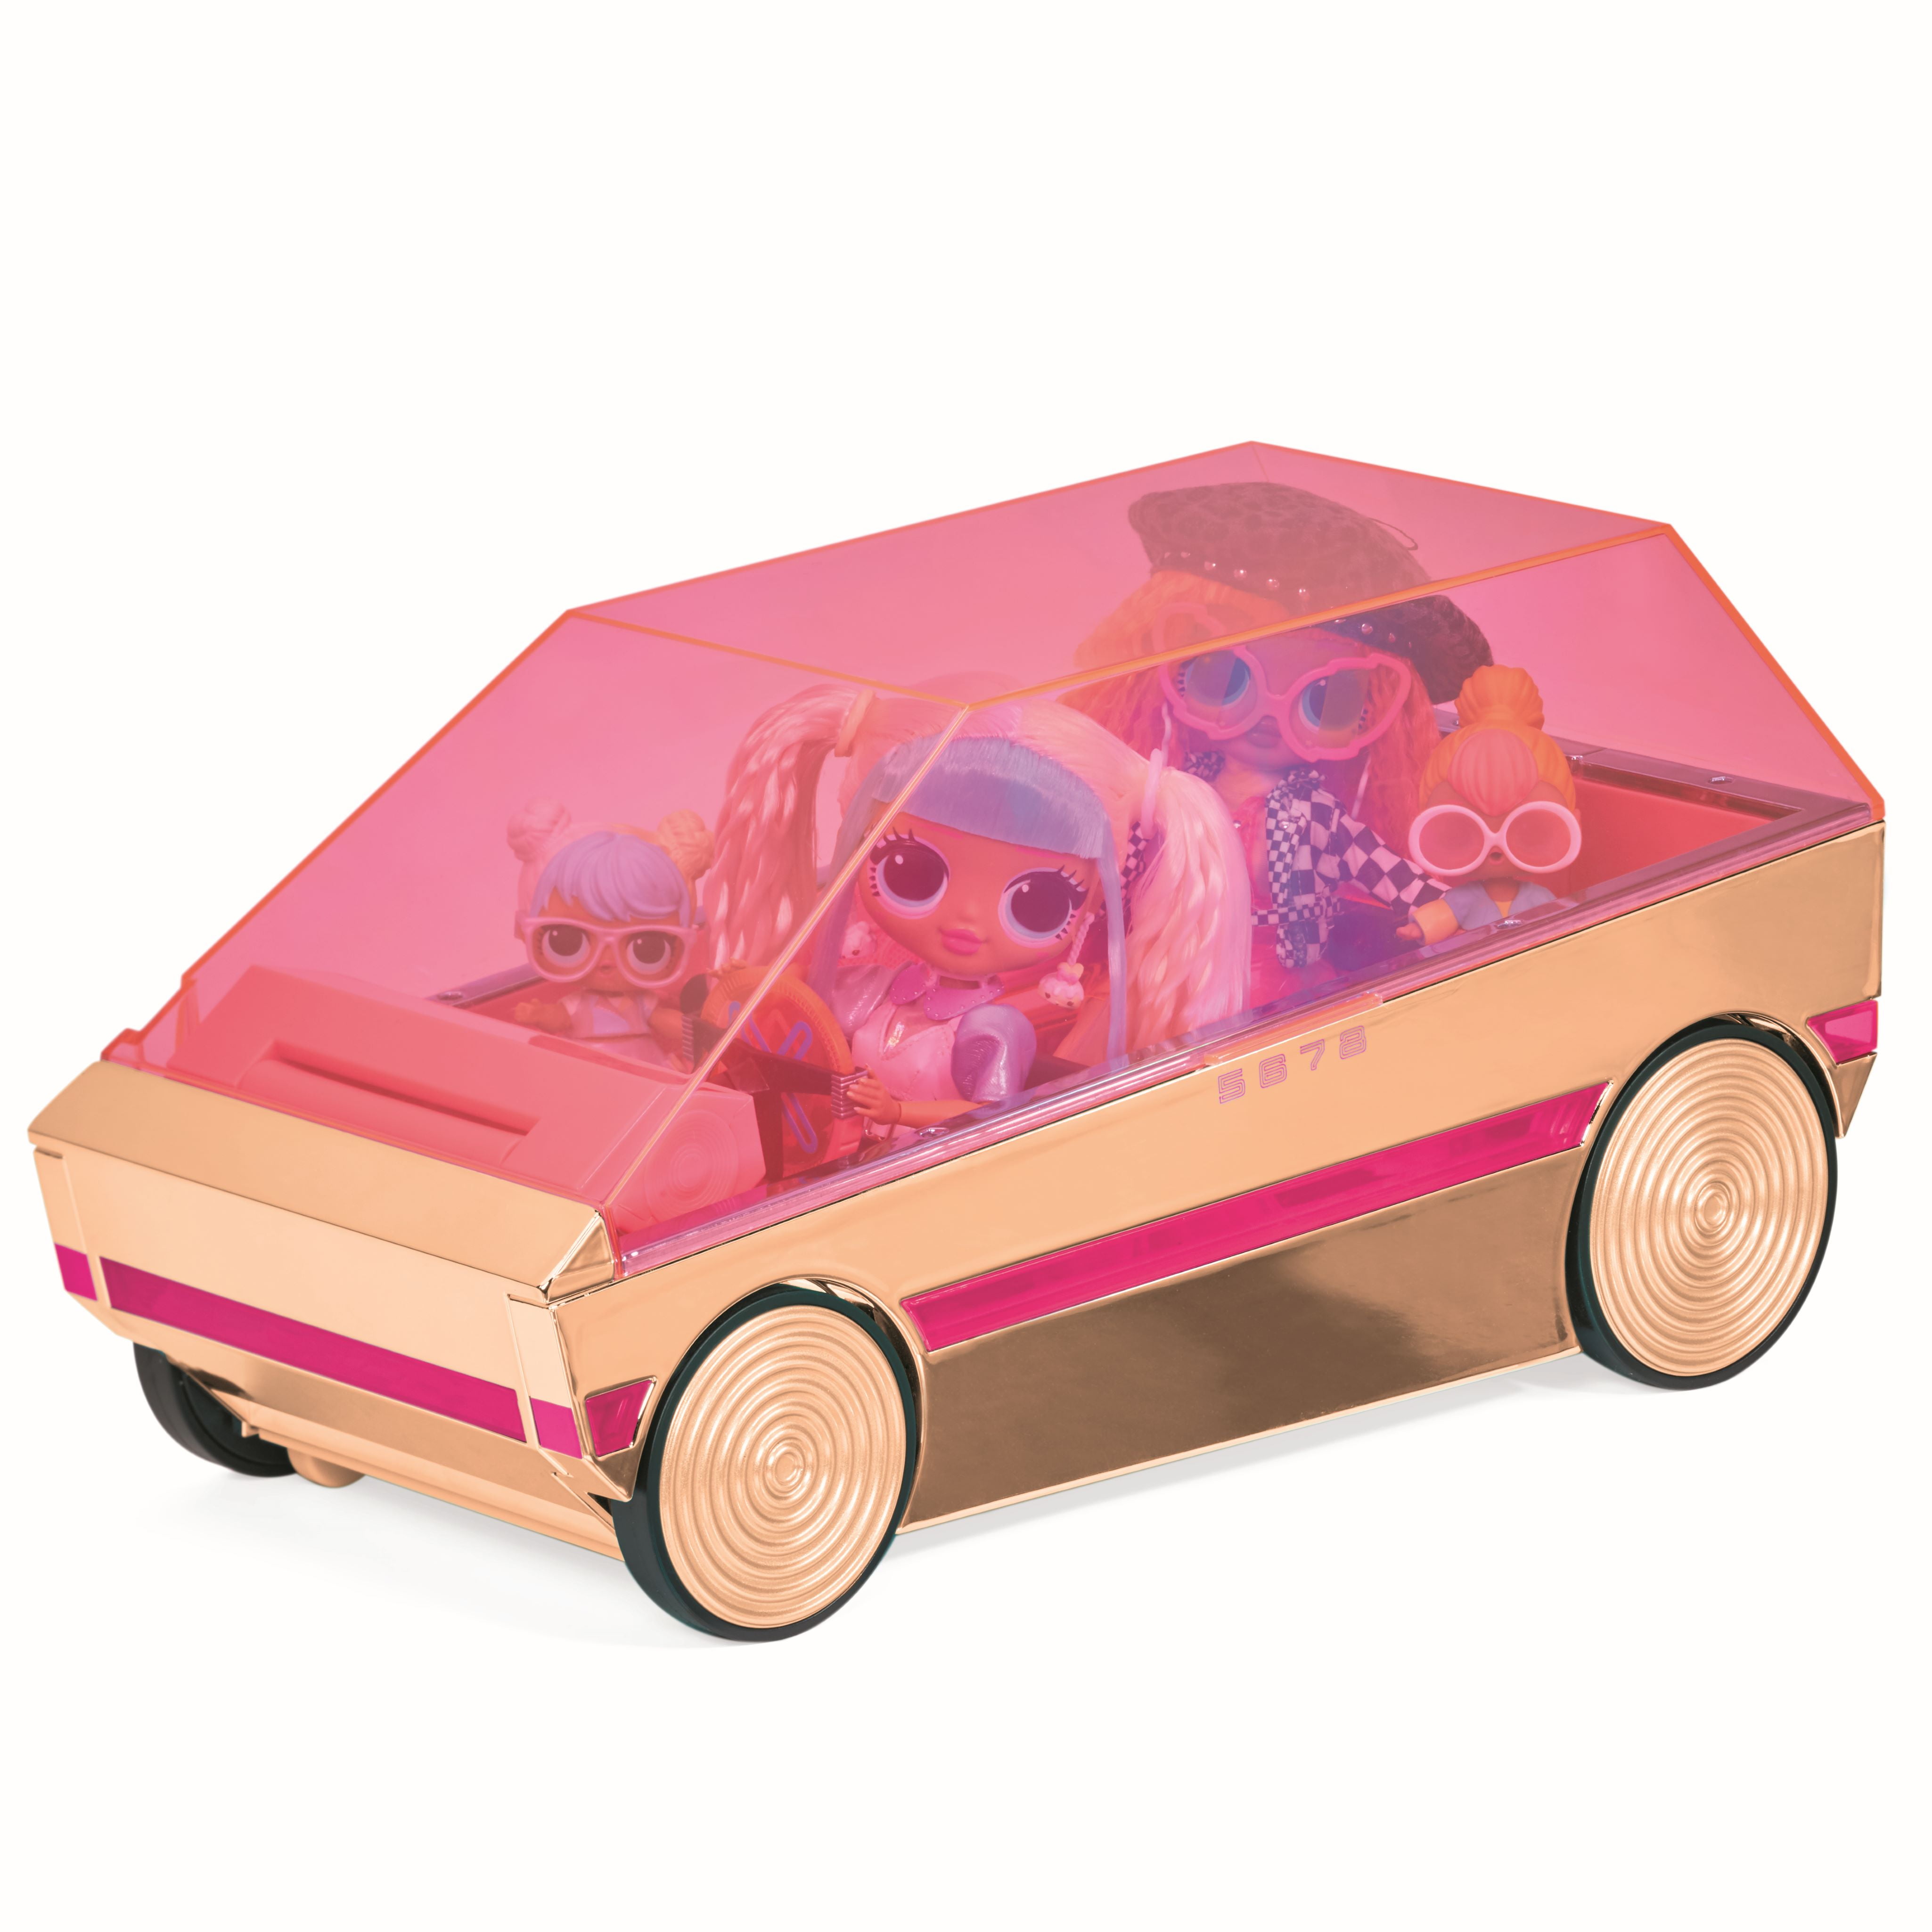  LOL Surprise Dance Machine Car with Exclusive Doll, Surprise  Pool and Dance Floor, Multicolor and Magic Blacklight, for Kids : Toys &  Games